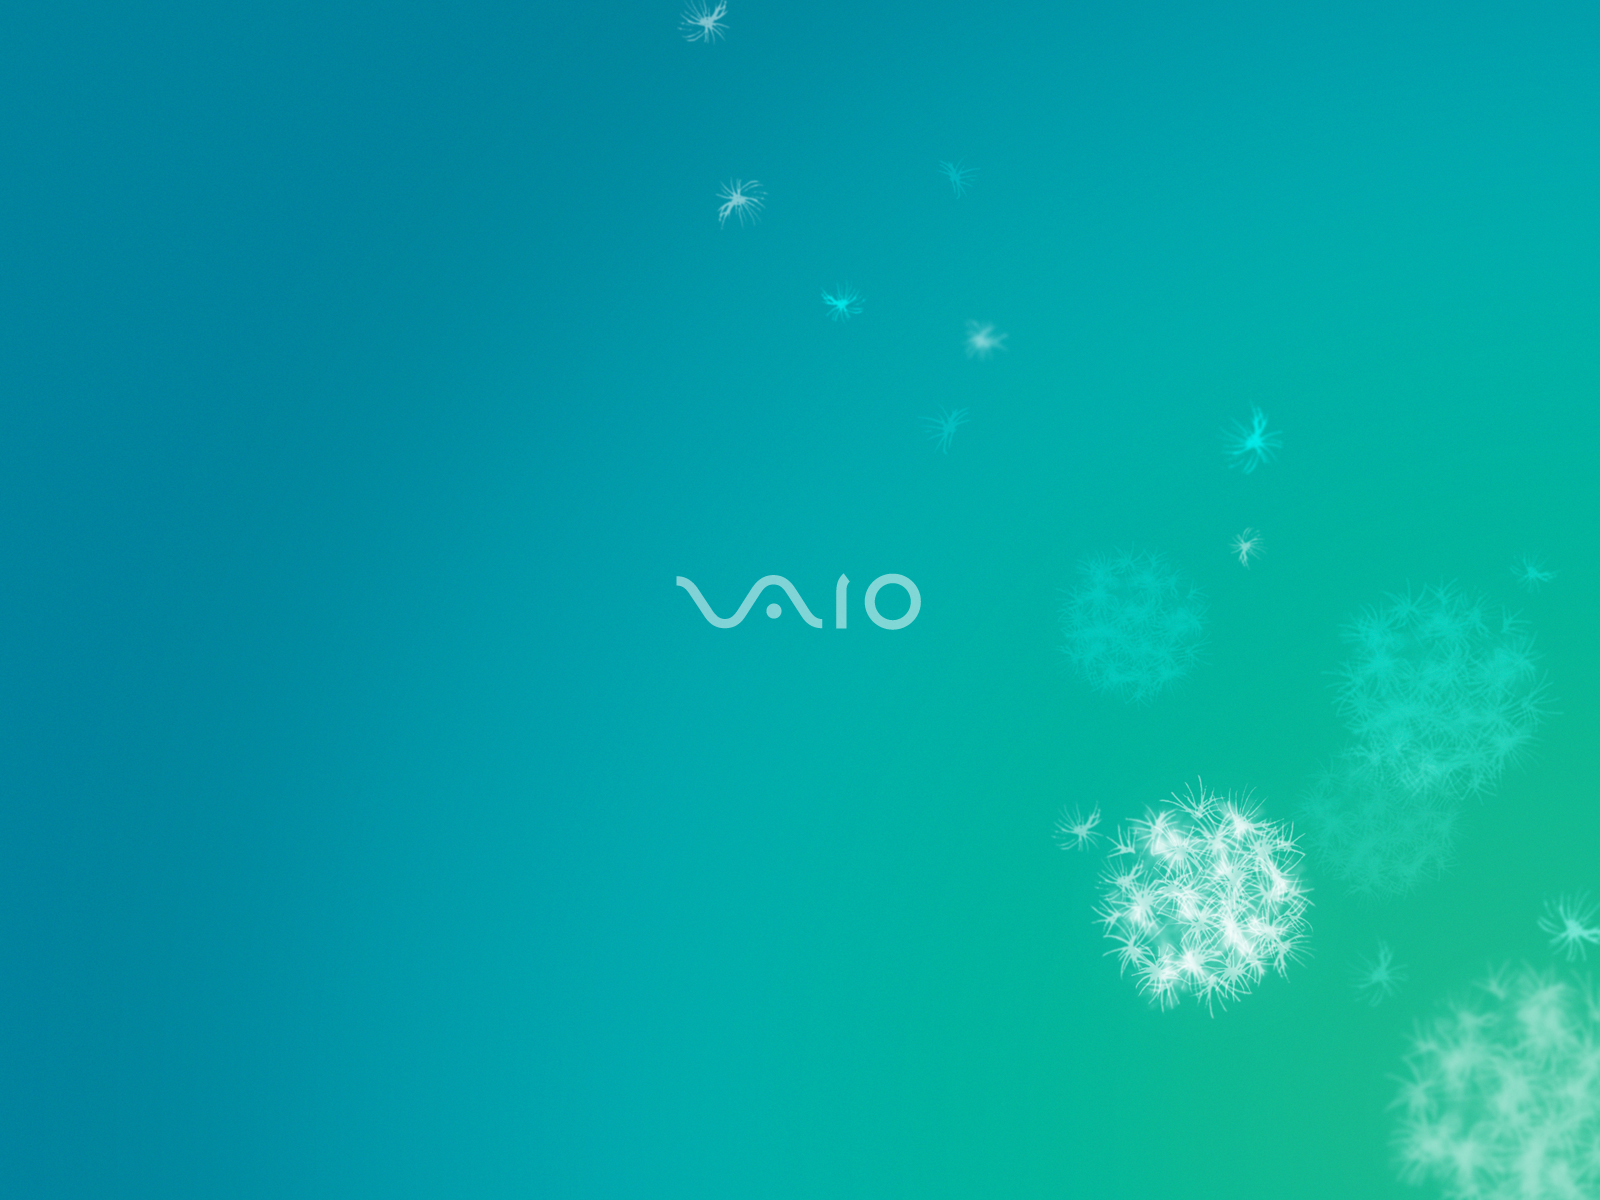 Sony Vaio 10 Wallpapers Wallpapers Hd